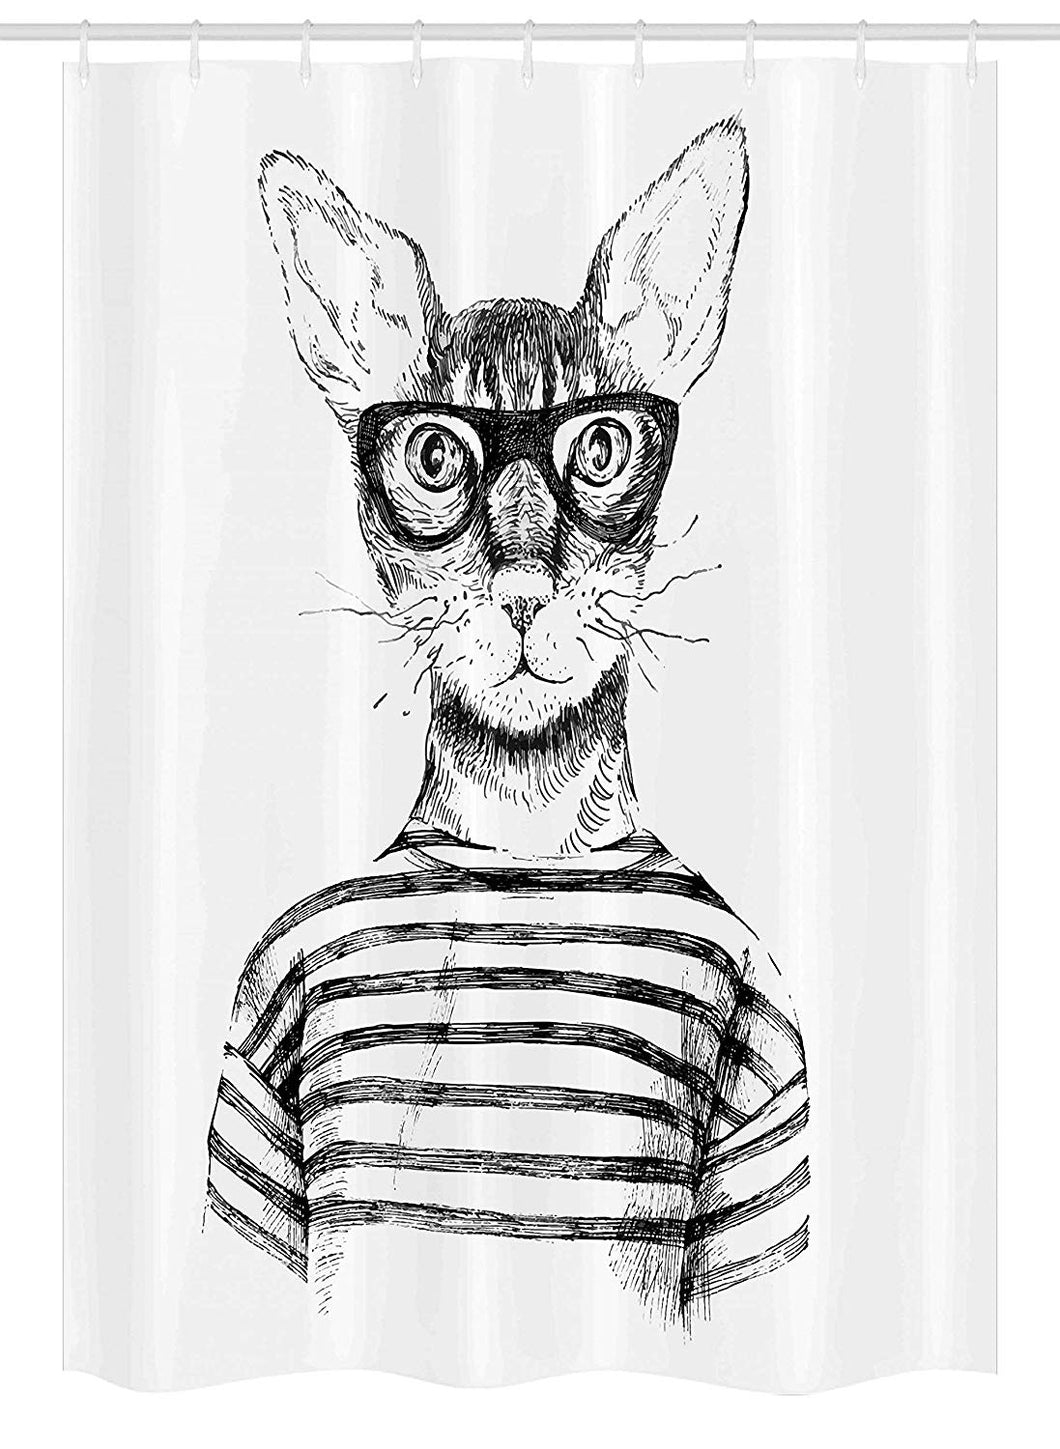 Ambesonne Cat Stall Shower Curtain, Hand Drawn Dressed up Hipster New Age Cat Fashion Urban Free Spirit Artwork Print, Fabric Bathroom Decor Set with Hooks, 54